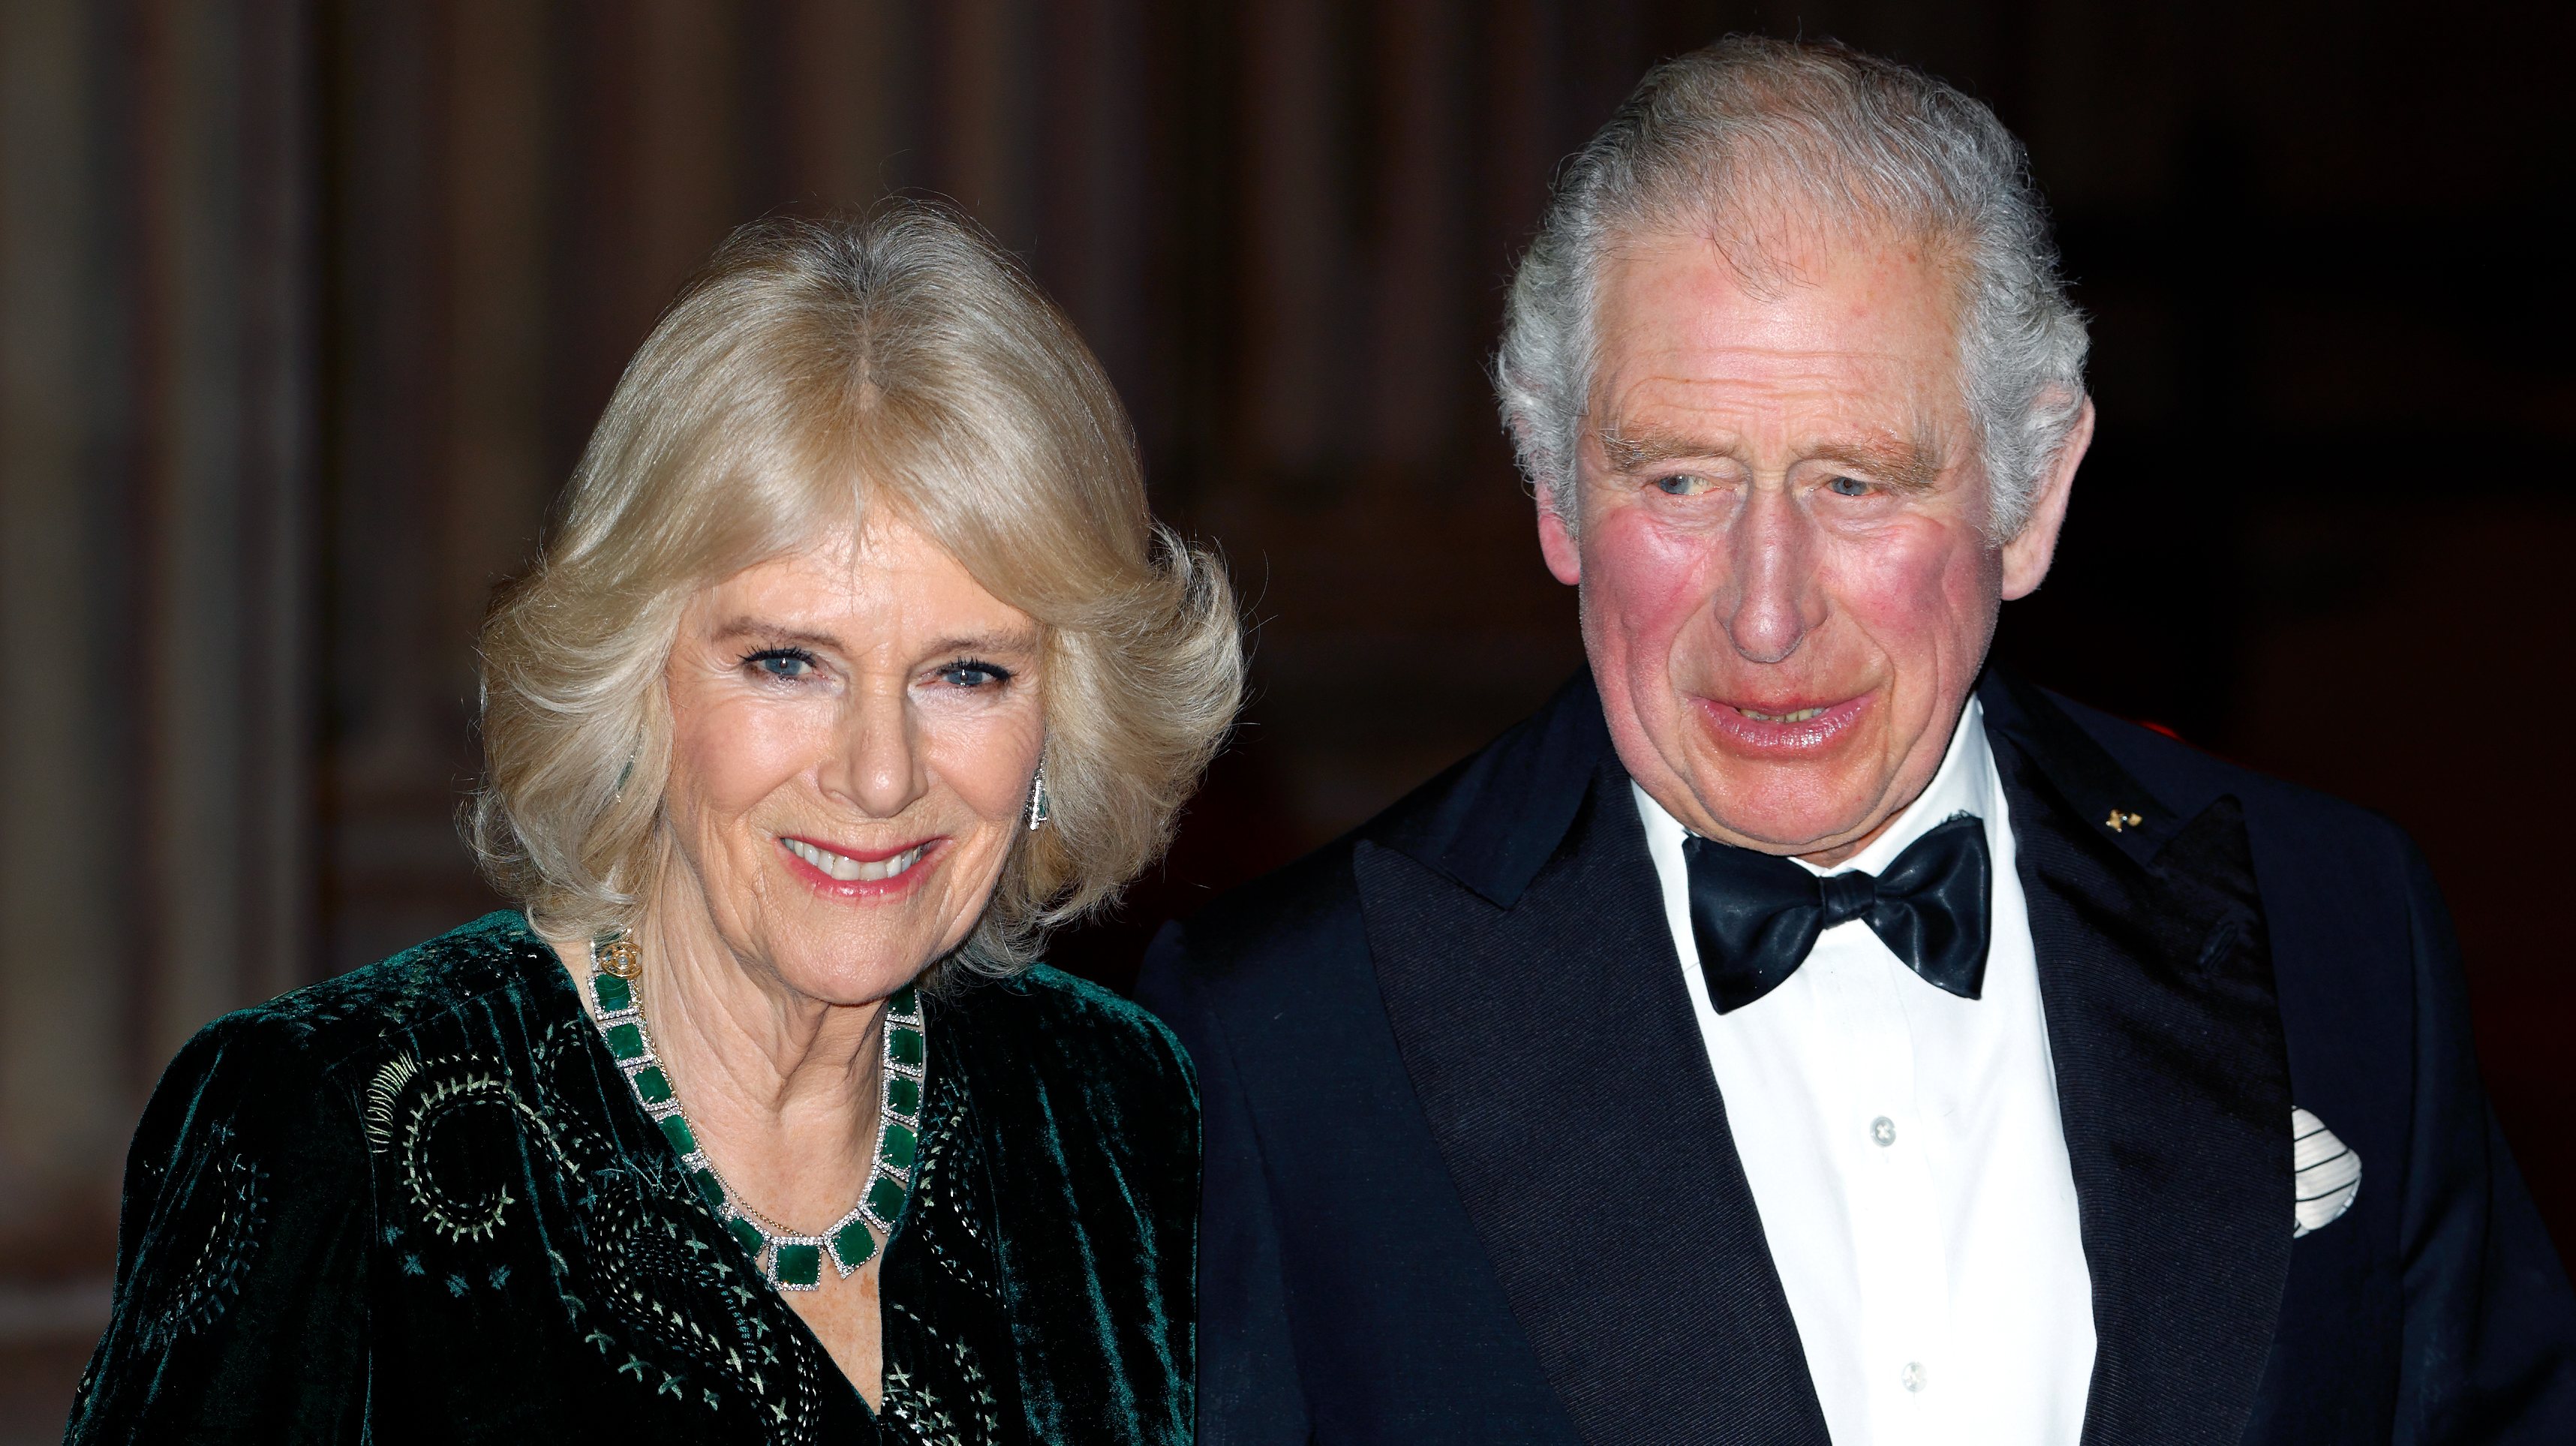 The Prince Of Wales And Duchess Of Cornwall Celebrate The British Asian Trust